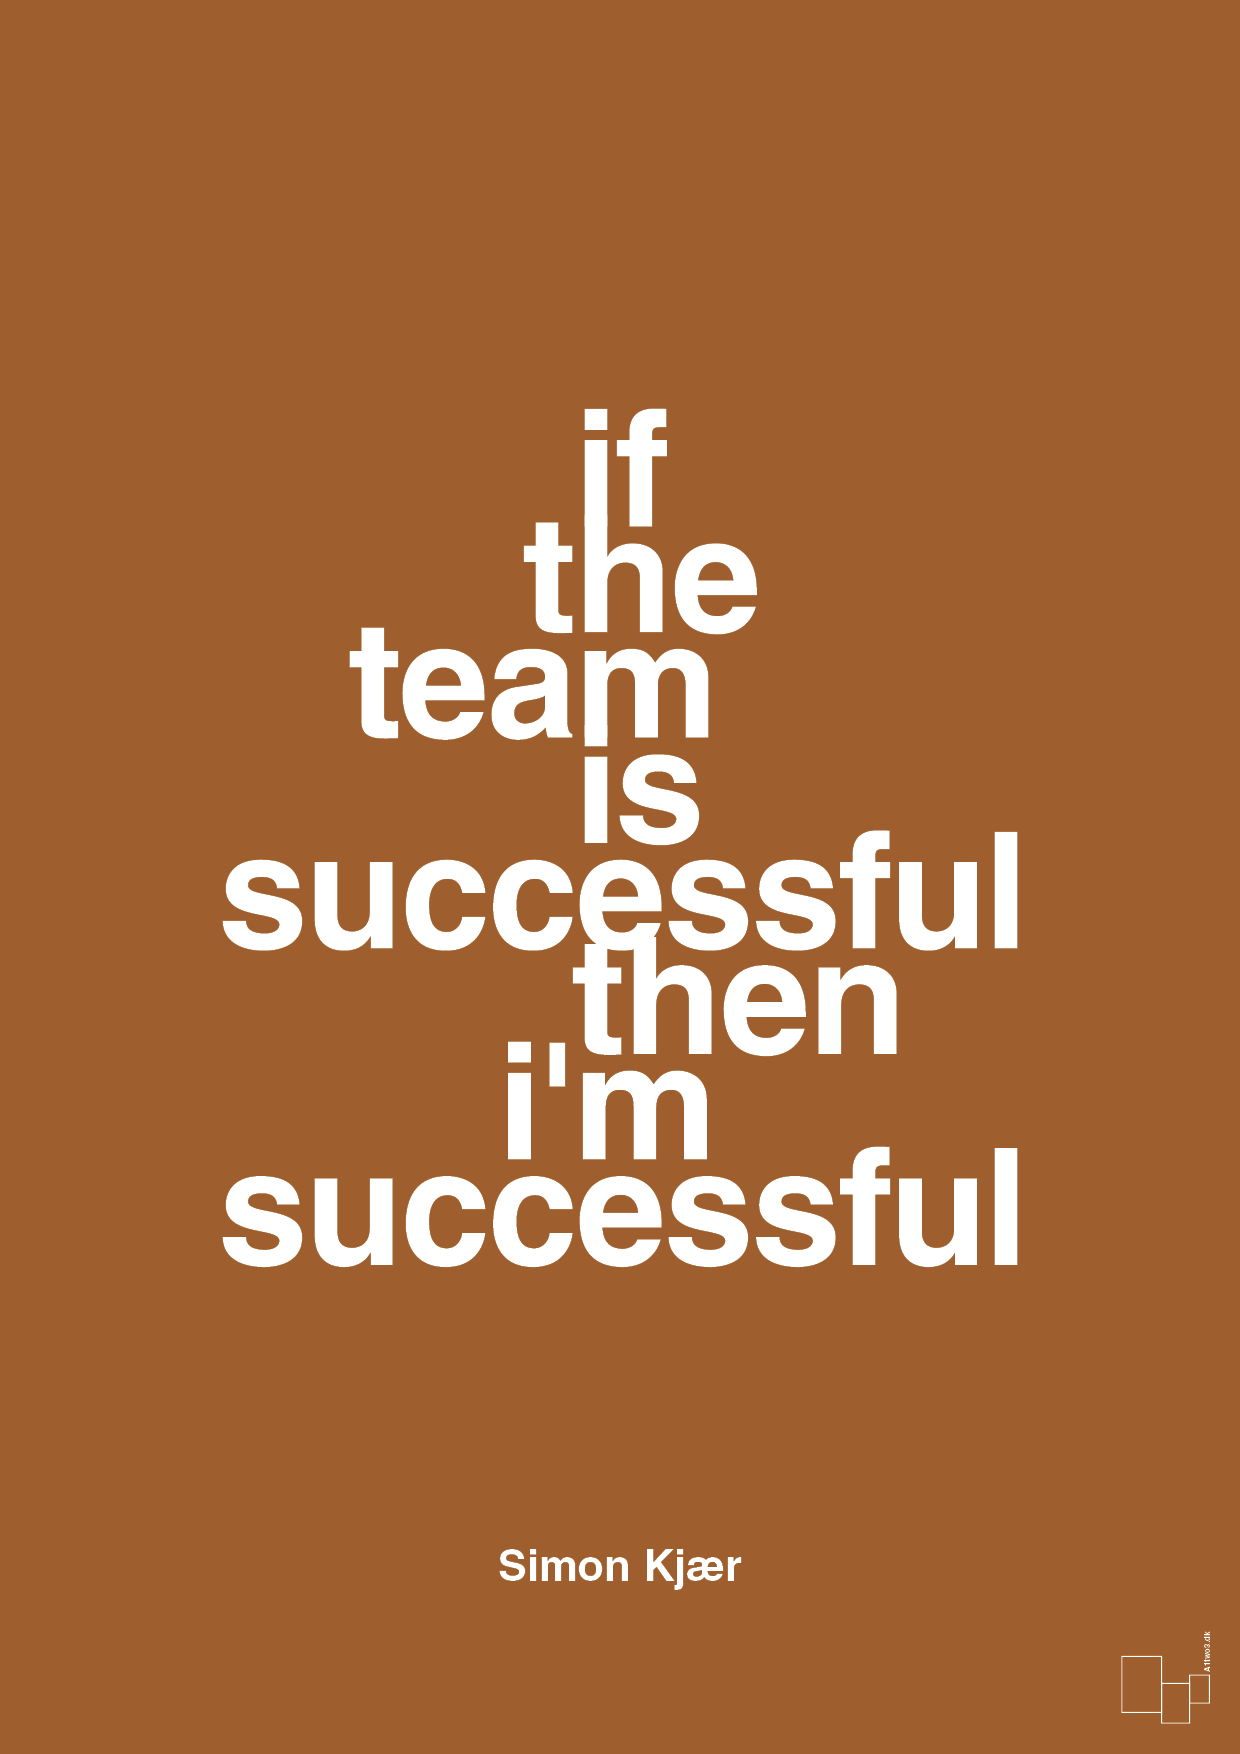 if the team is successful then i'm successful - Plakat med Citater i Cognac